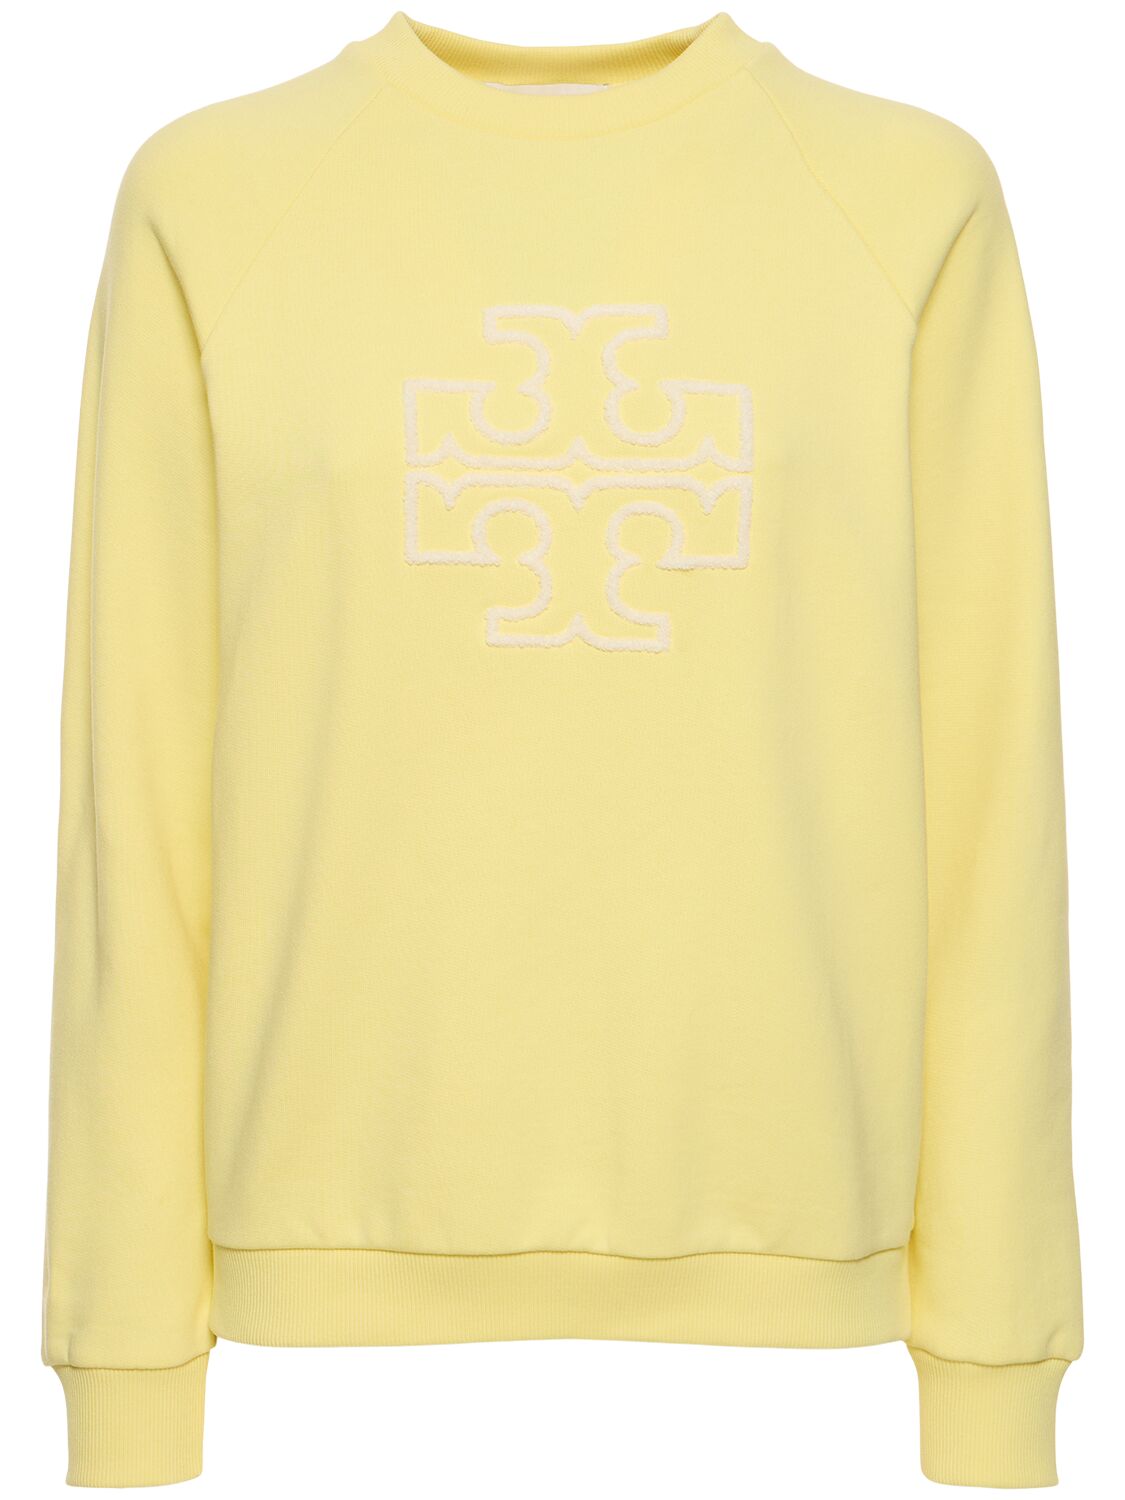 Tory Sport French Terry Cotton Crewneck Sweatshirt In Yellow